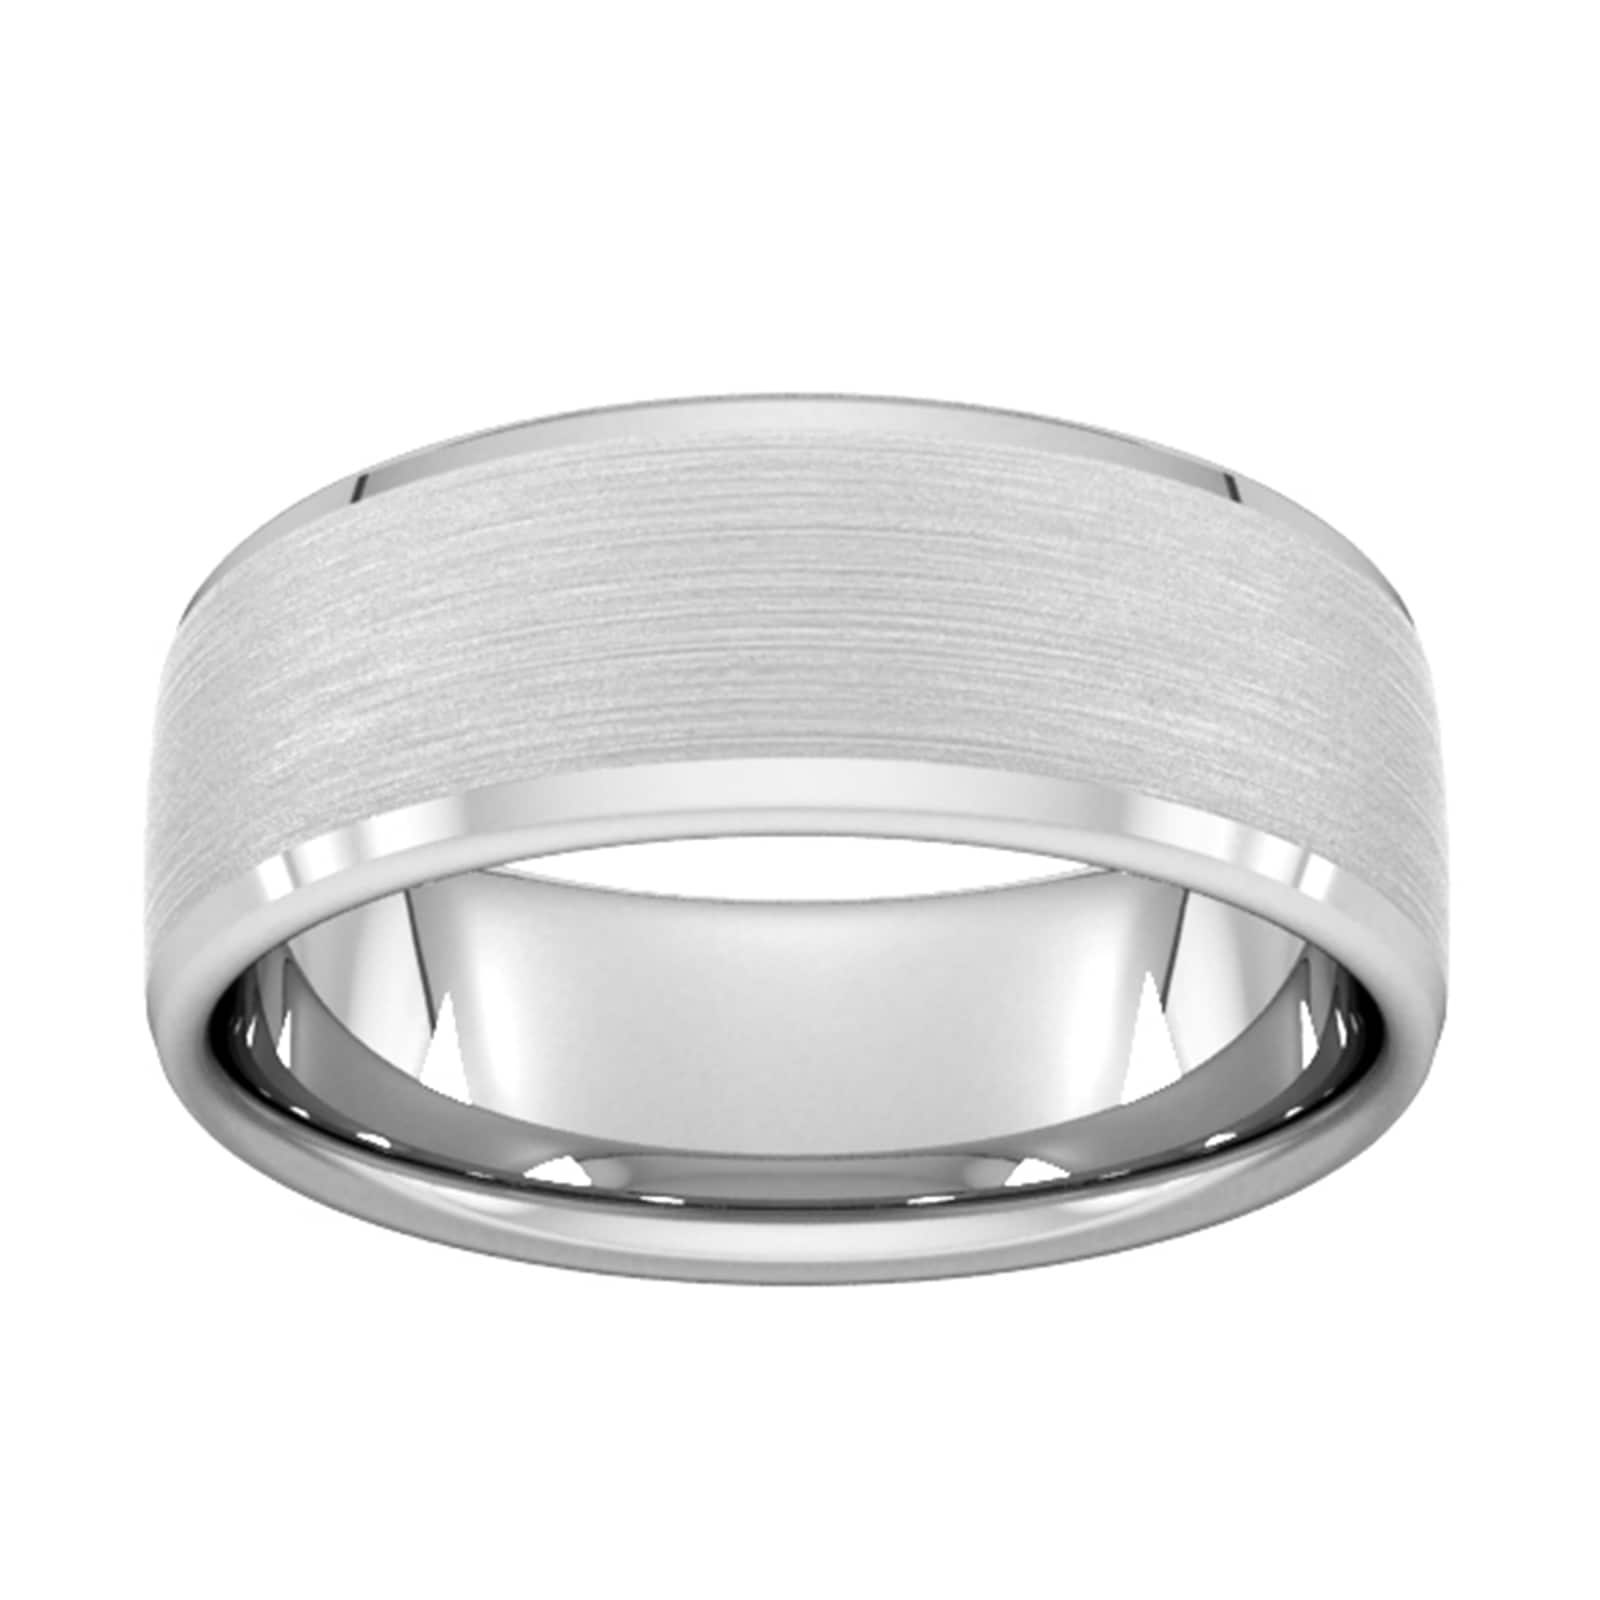 8mm Slight Court Heavy Polished Chamfered Edges With Matt Centre Wedding Ring In 18 Carat White Gold - Ring Size S